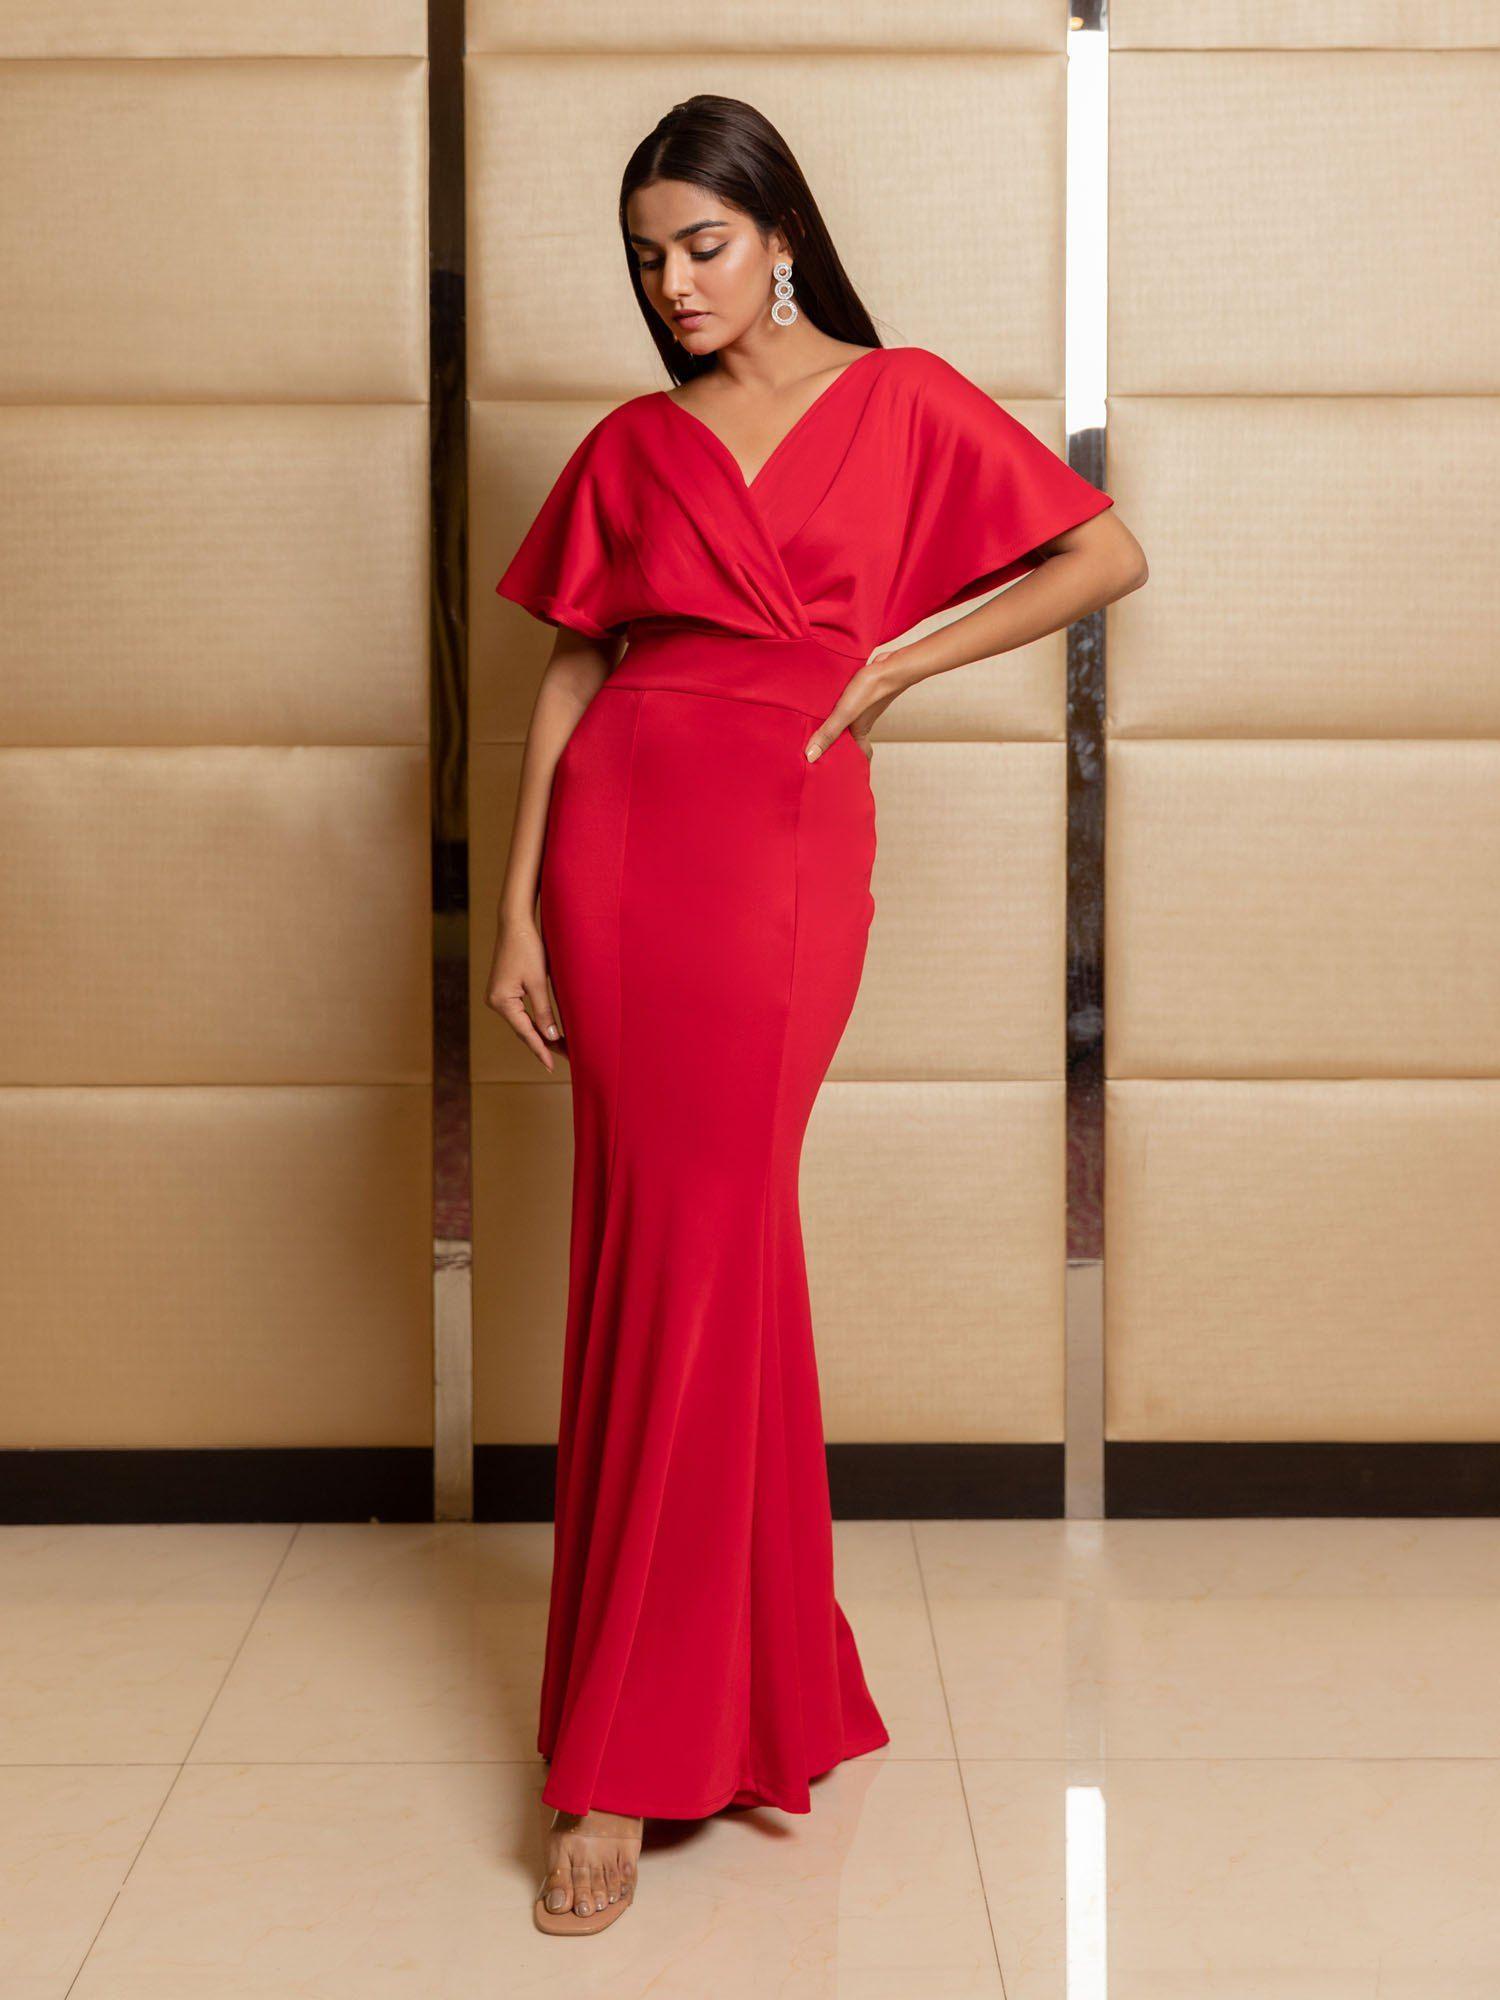 classic scarlet red gown